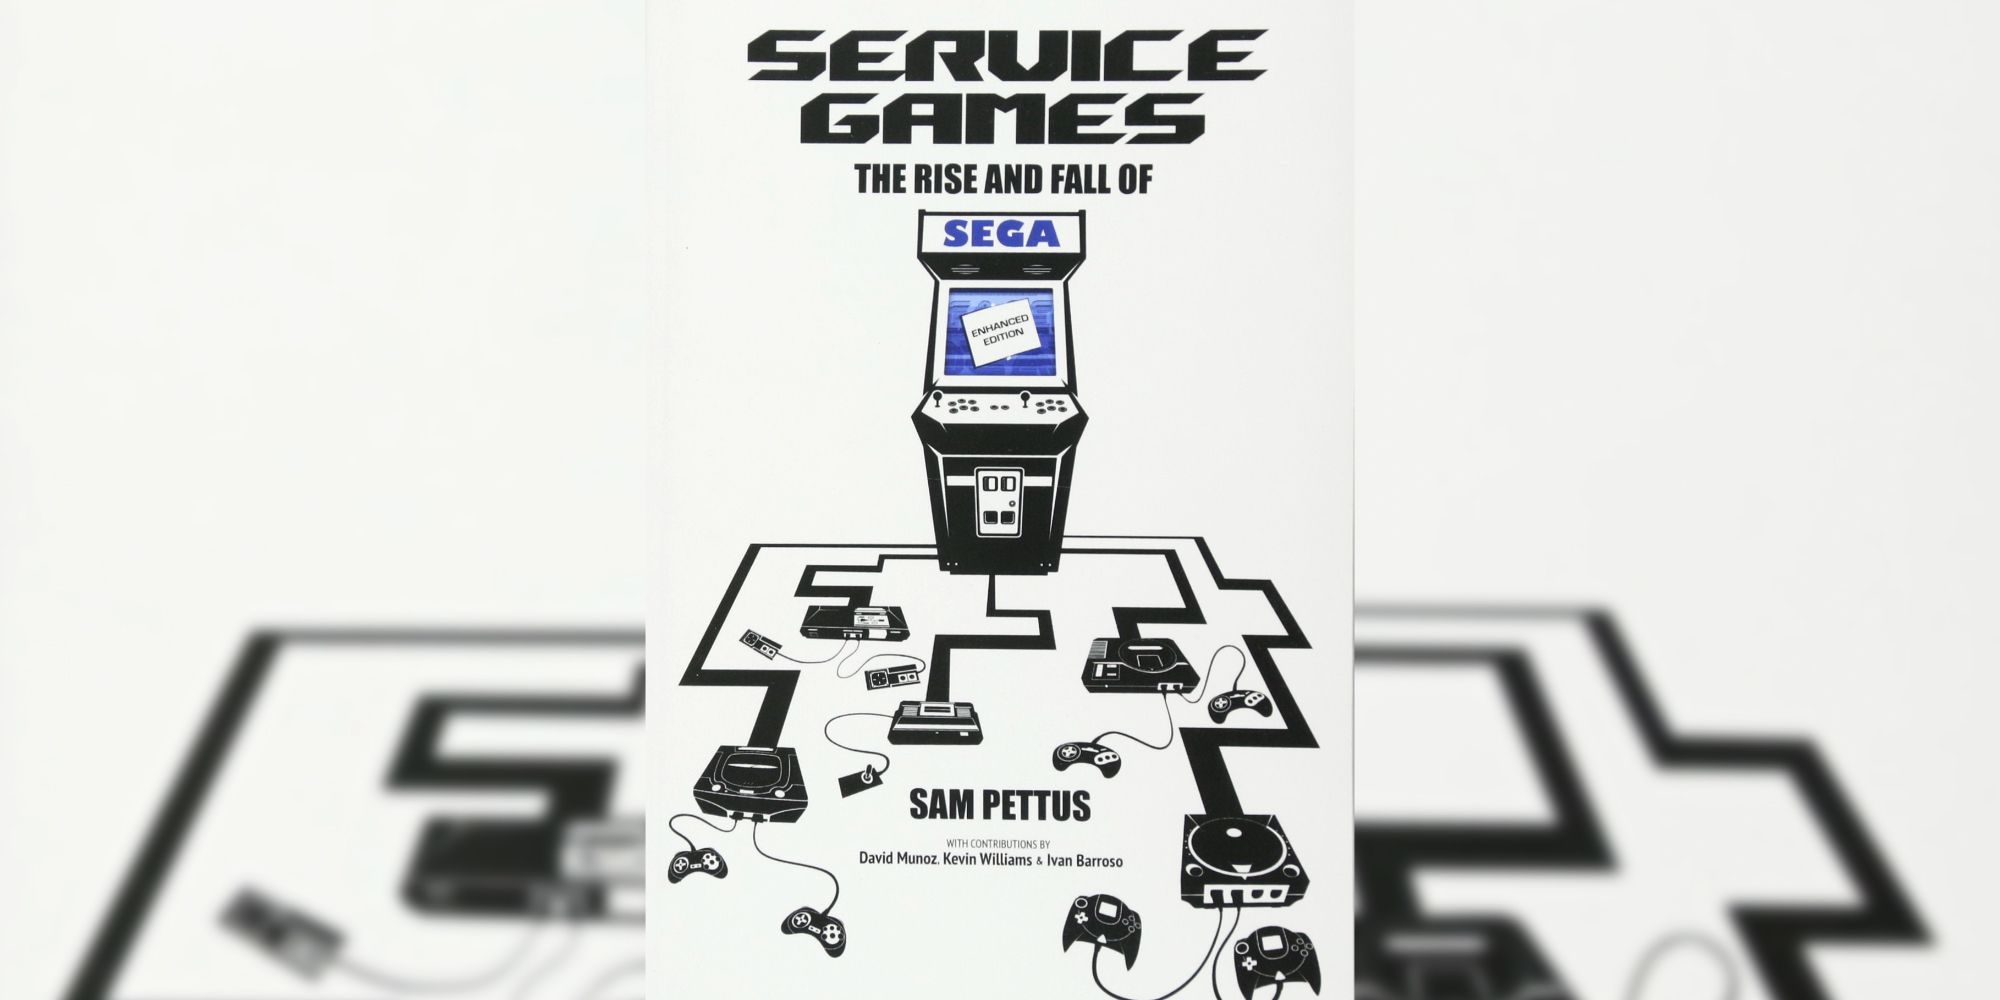 Image Showing The Cover of Service Games: The Rise and Fall of Sega by Sam Pettus